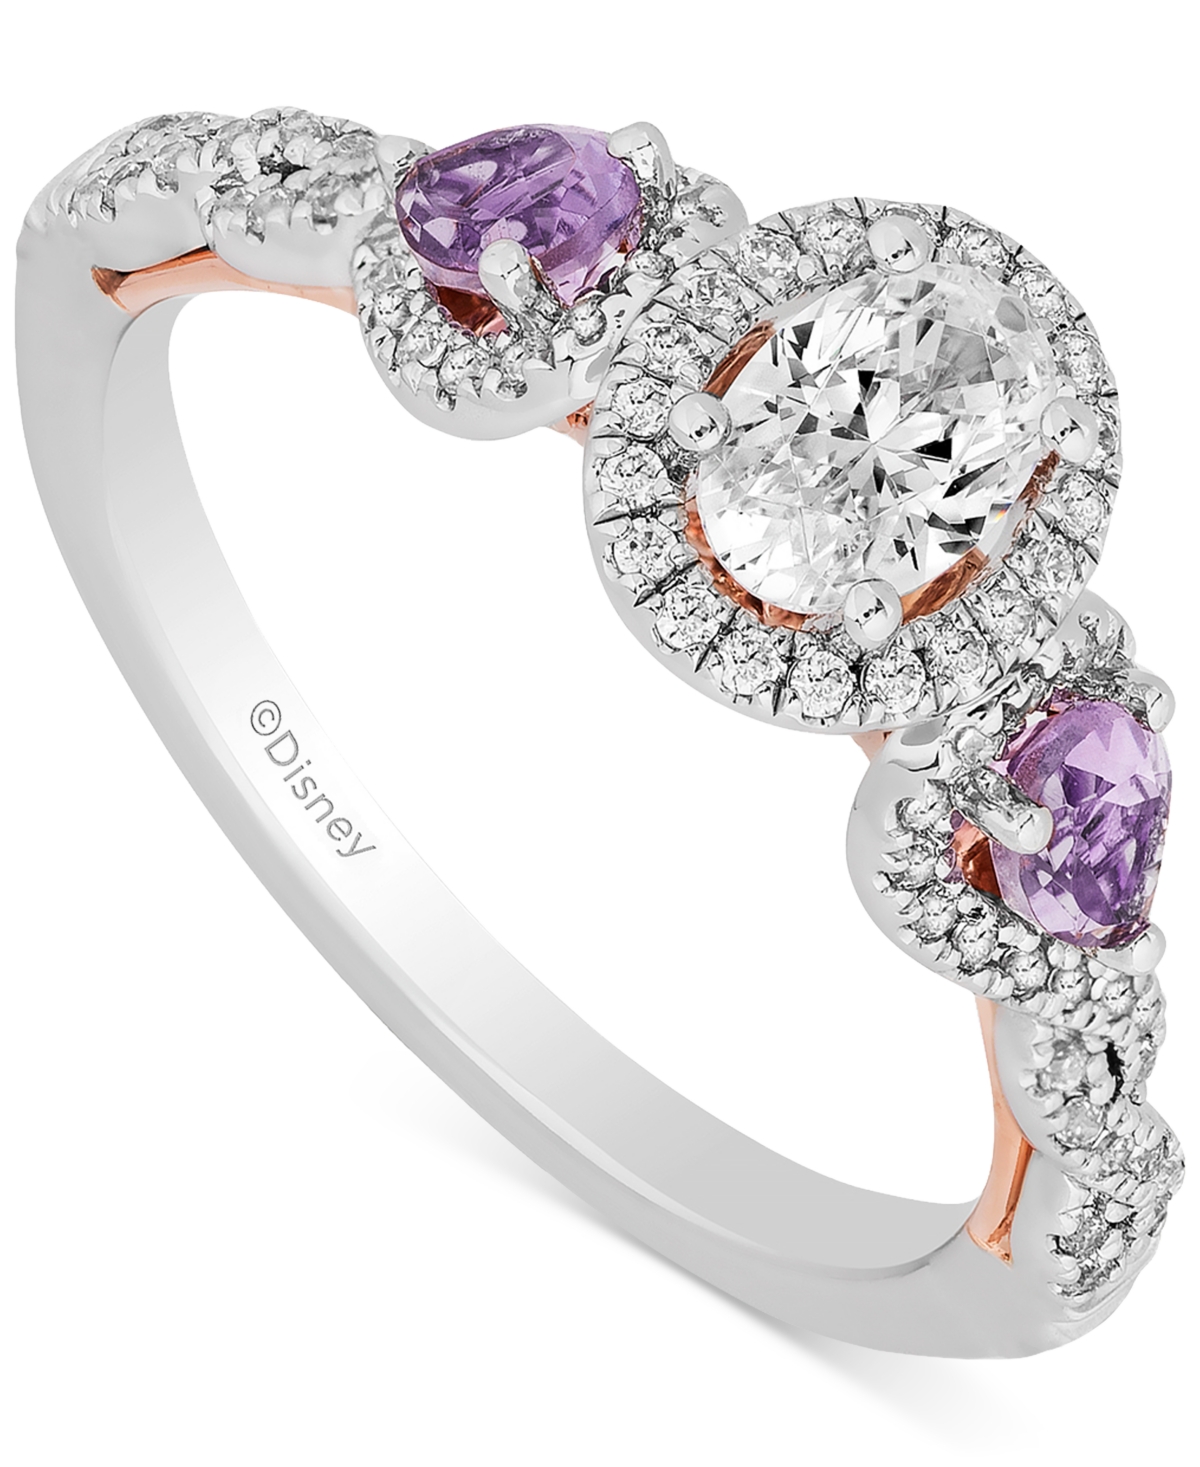 Diamond (3/4 ct. t.w.) & Rose de France Amethyst (1/3 ct. t.w.) Rapunzel Halo Ring in 14k White & Rose Gold - Two Tone